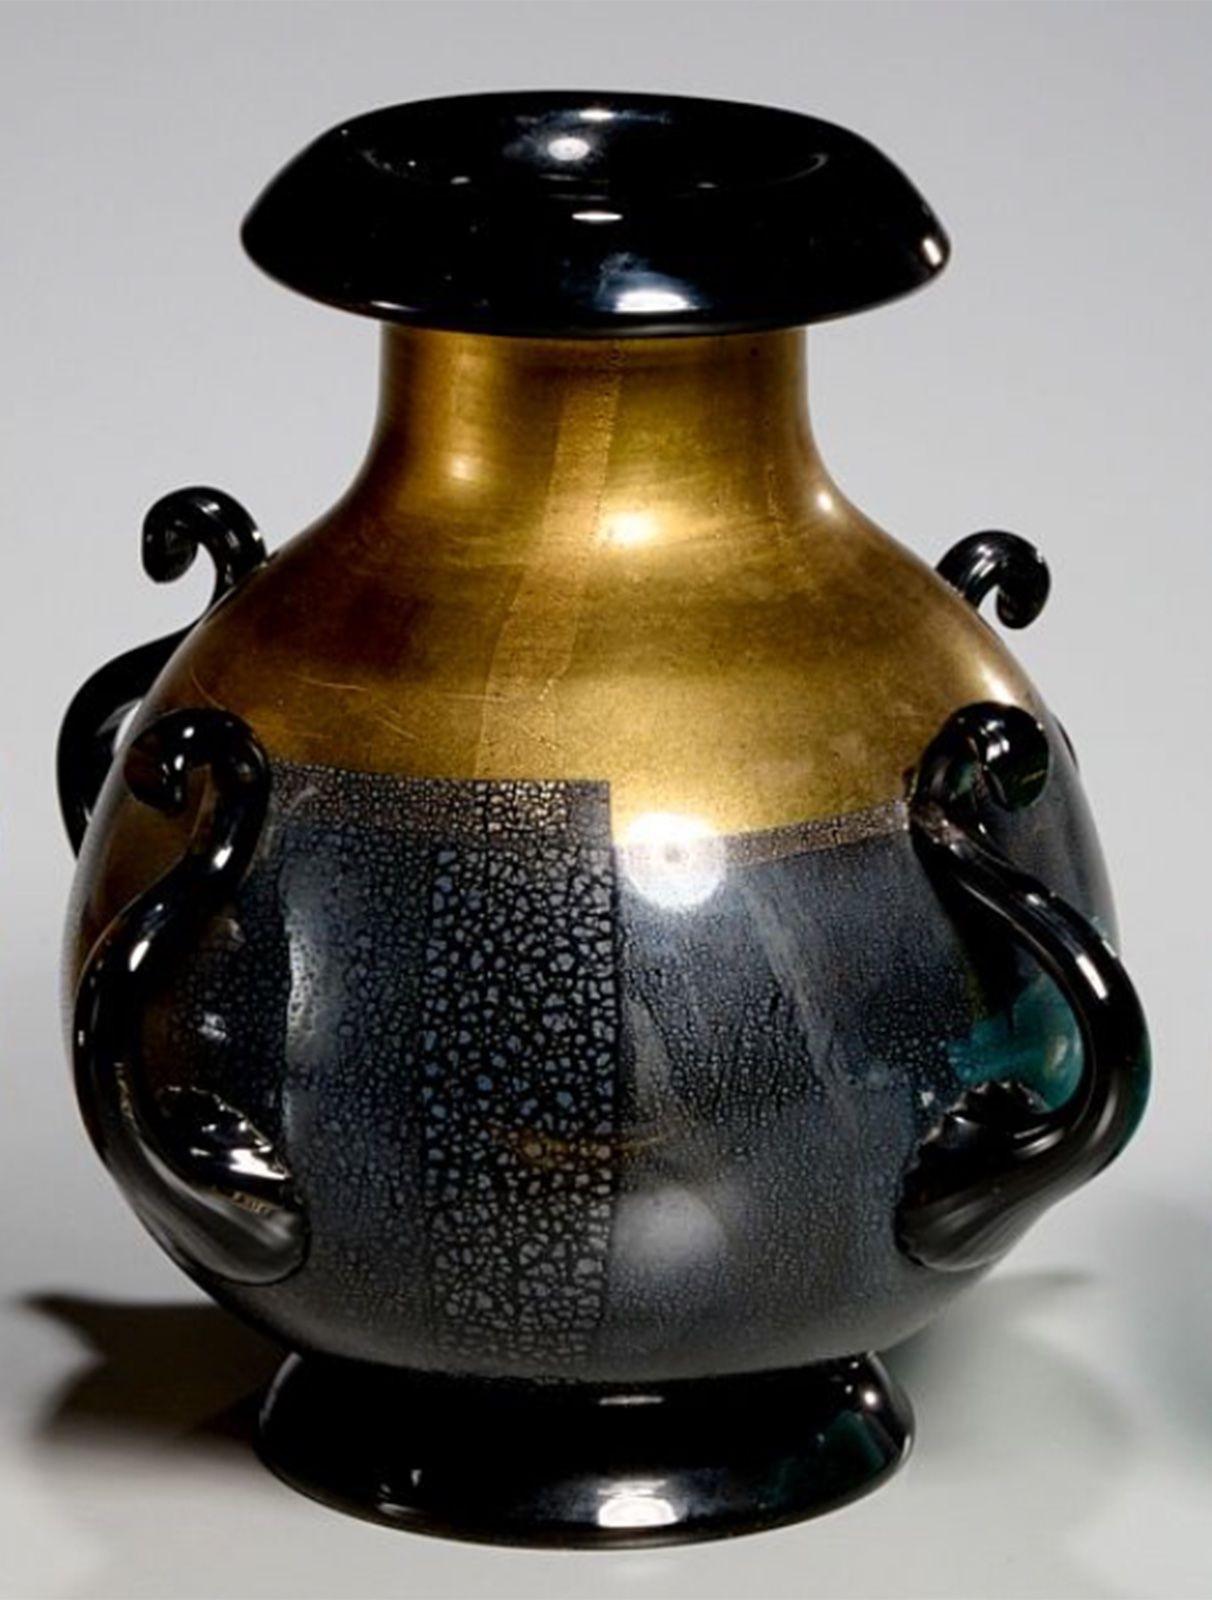 Vintage amphora style vase made of black and gold Murano glass, having four curved handles all around. made in Italy, c. 1970's.
*The piece is not signed by Murano, but information on provenance will be provided upon request.
Dimensions:
9